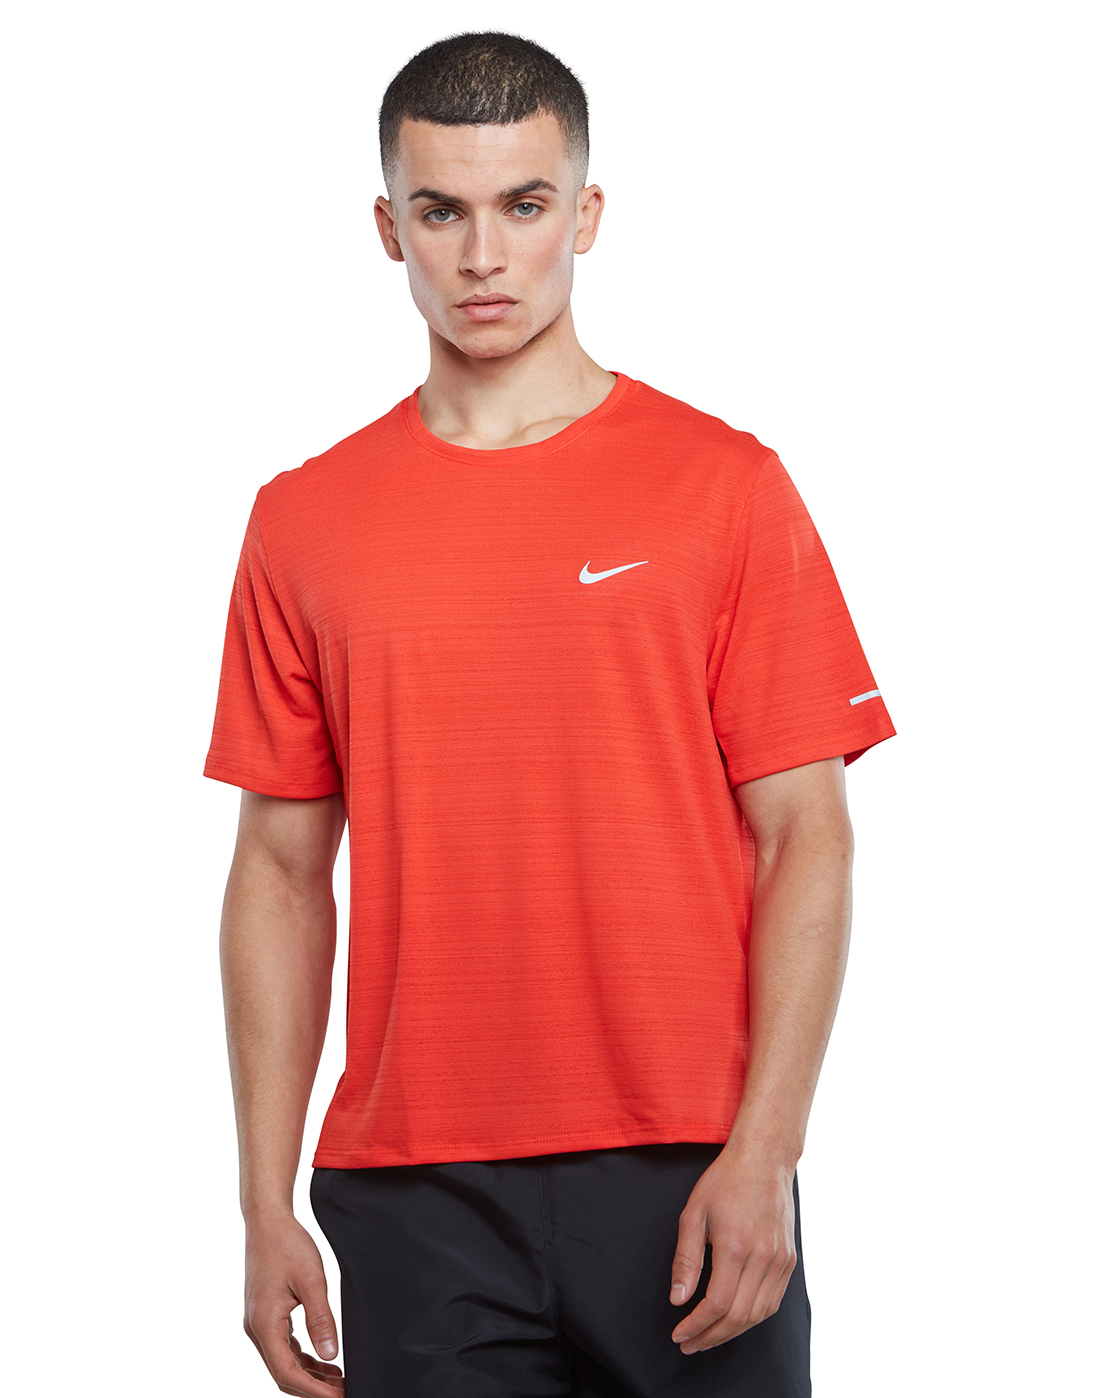 Nike Mens DriFit Miler T-shirt - Red | Life Style Sports IE